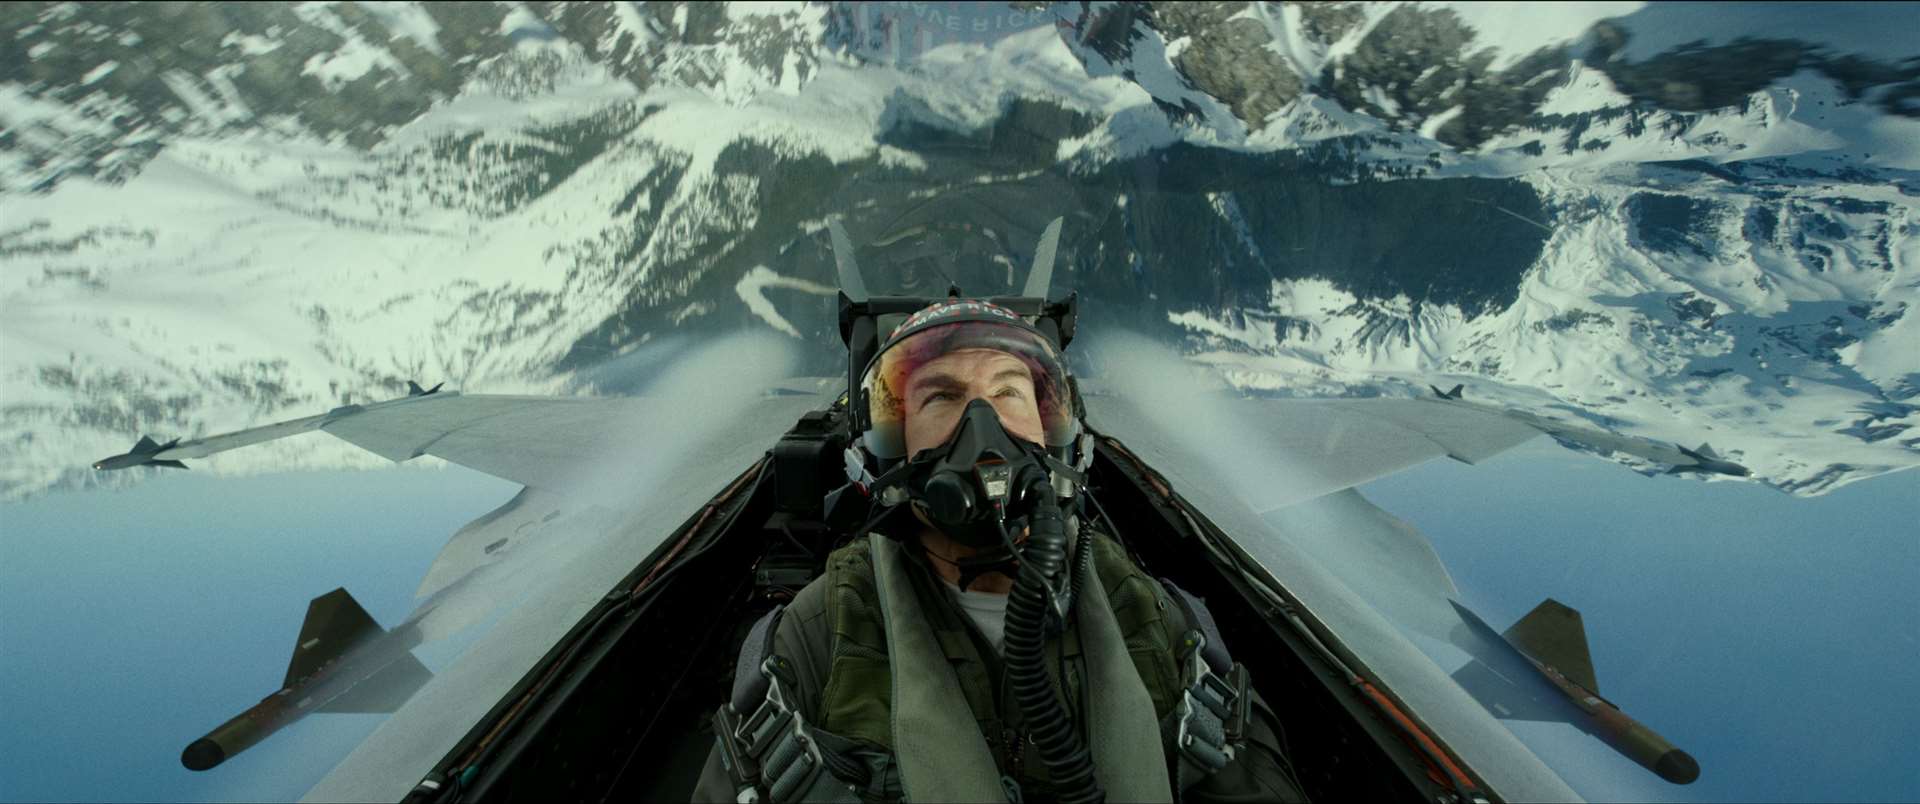 Tom Cruise as Captain Pete "Maverick" Mitchell in the air.